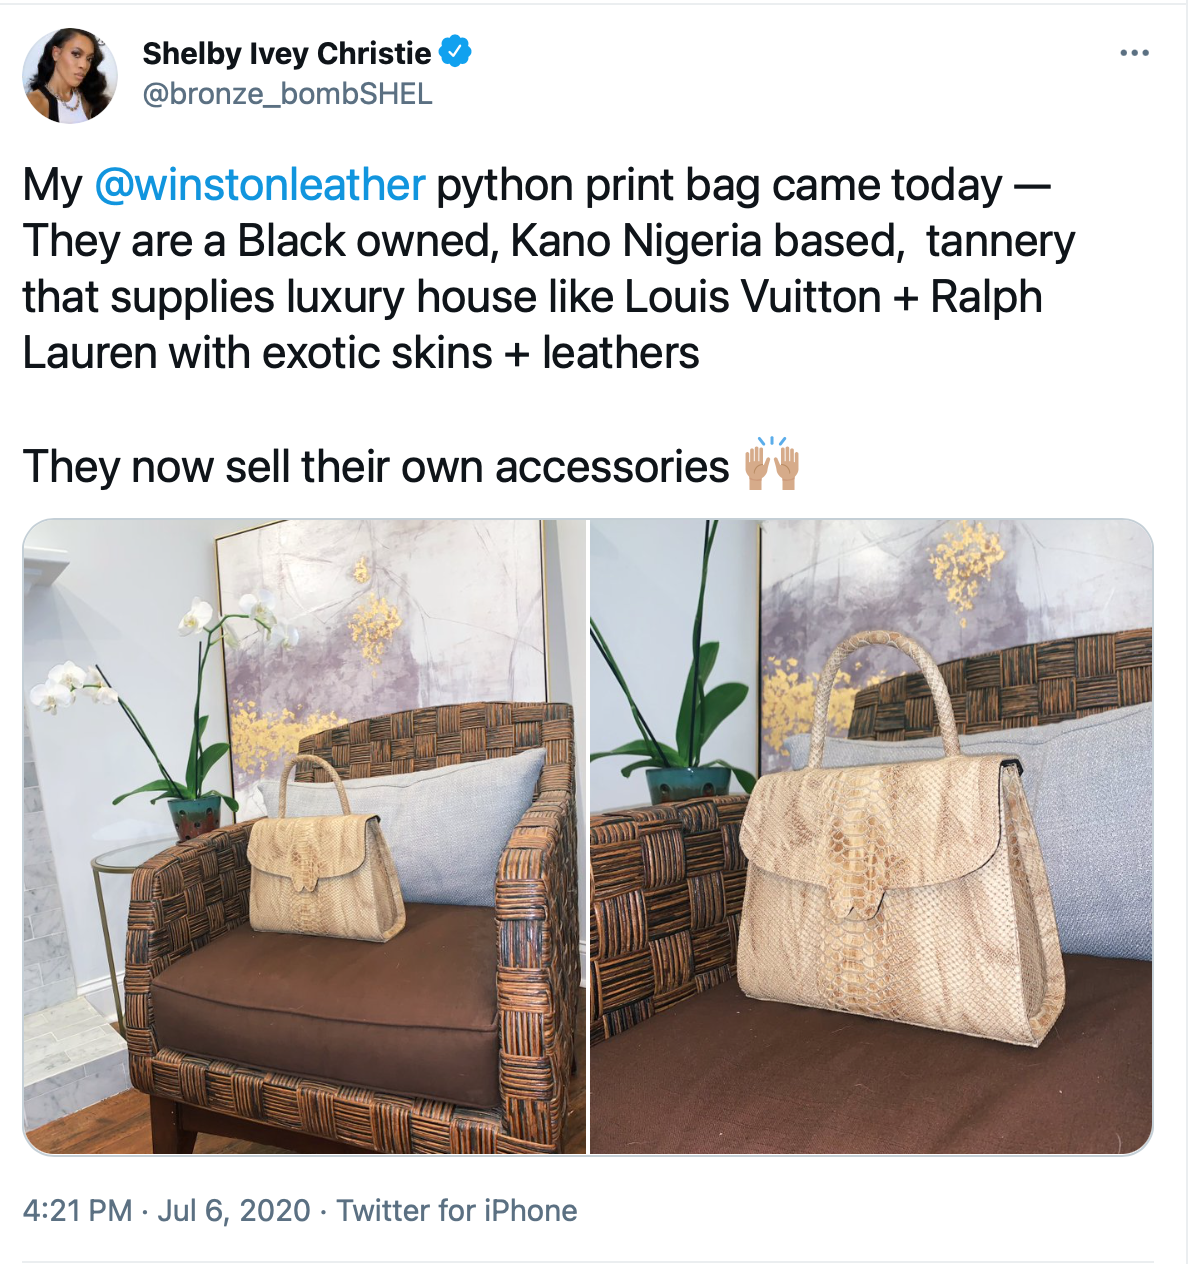 A screenshot of a tweet from fashion historian Shelby Ivey Christie promoting a Winston Leather python print handbag with two pictures of the purse.